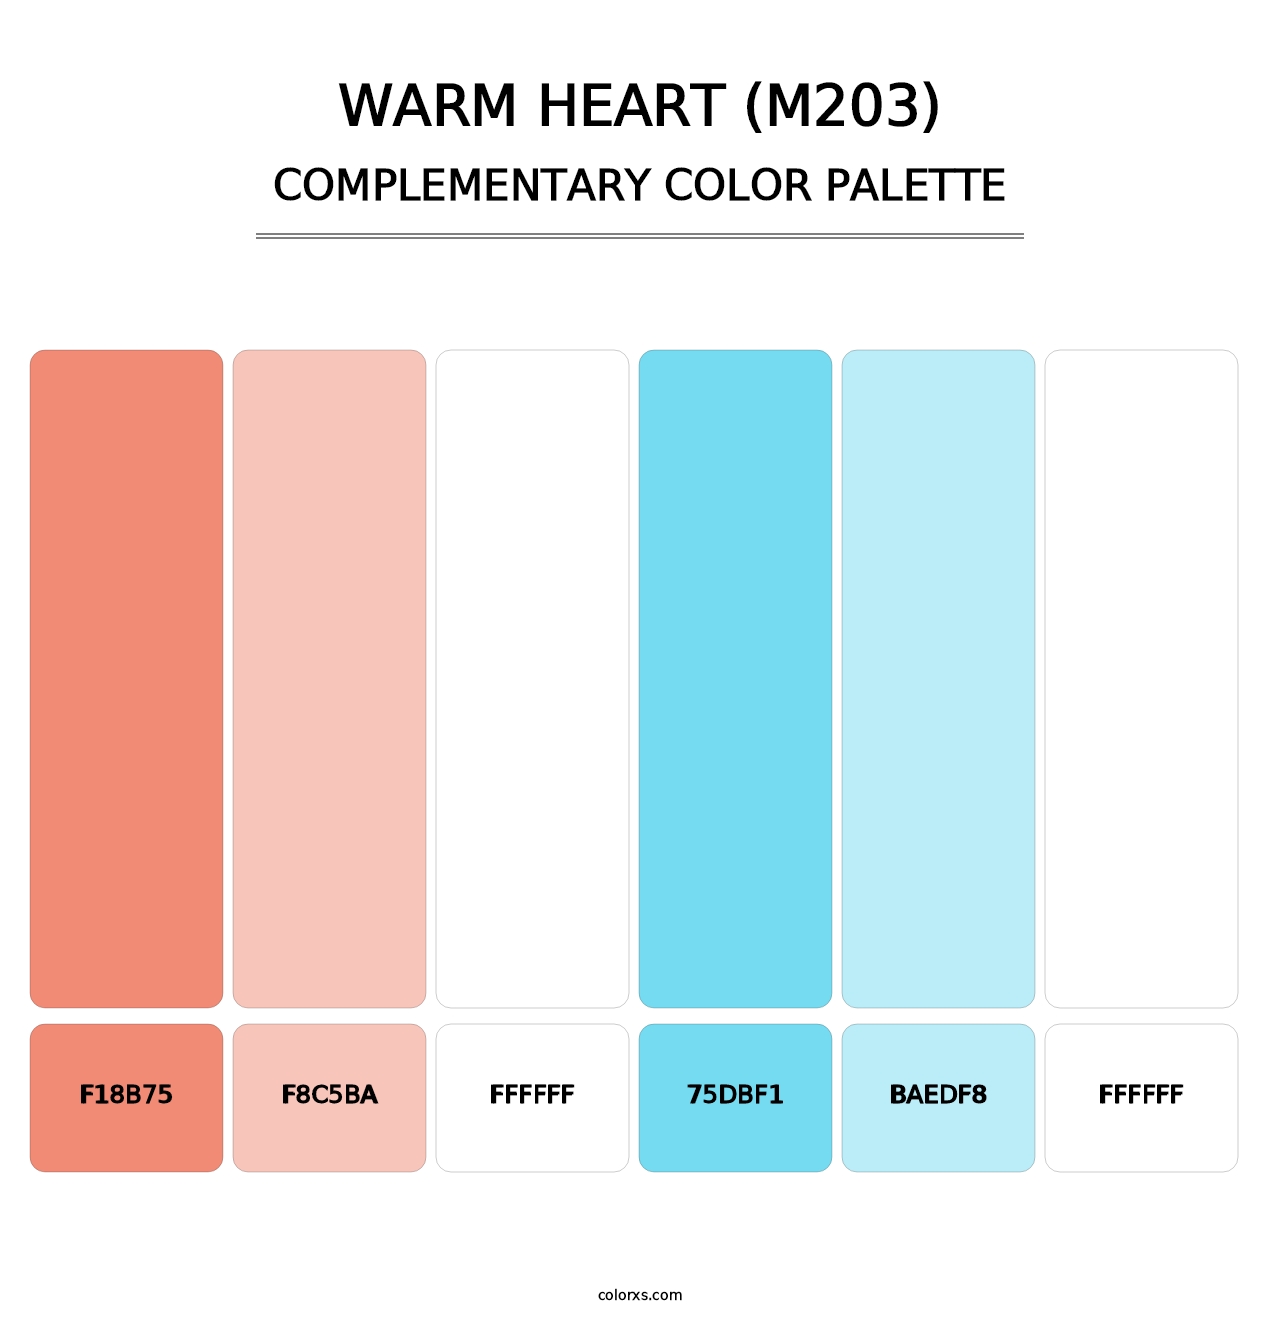 Warm Heart (M203) - Complementary Color Palette